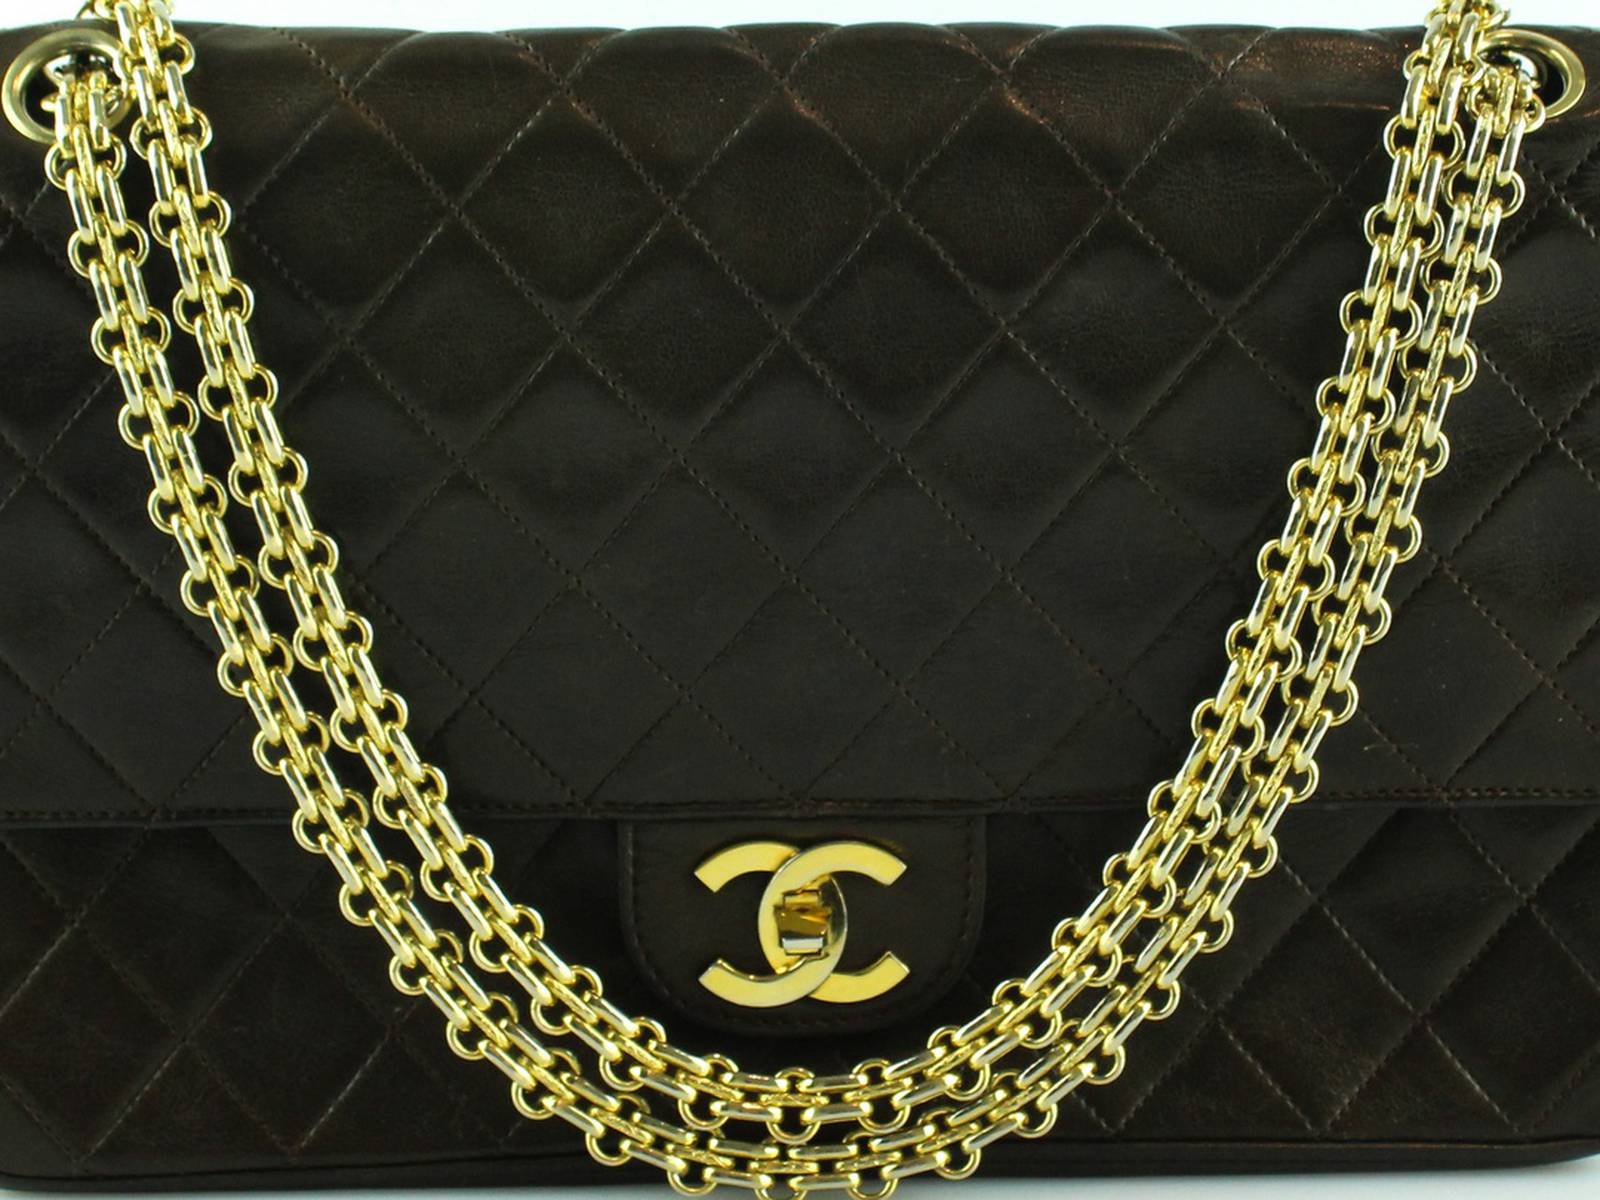 first chanel bag 1929